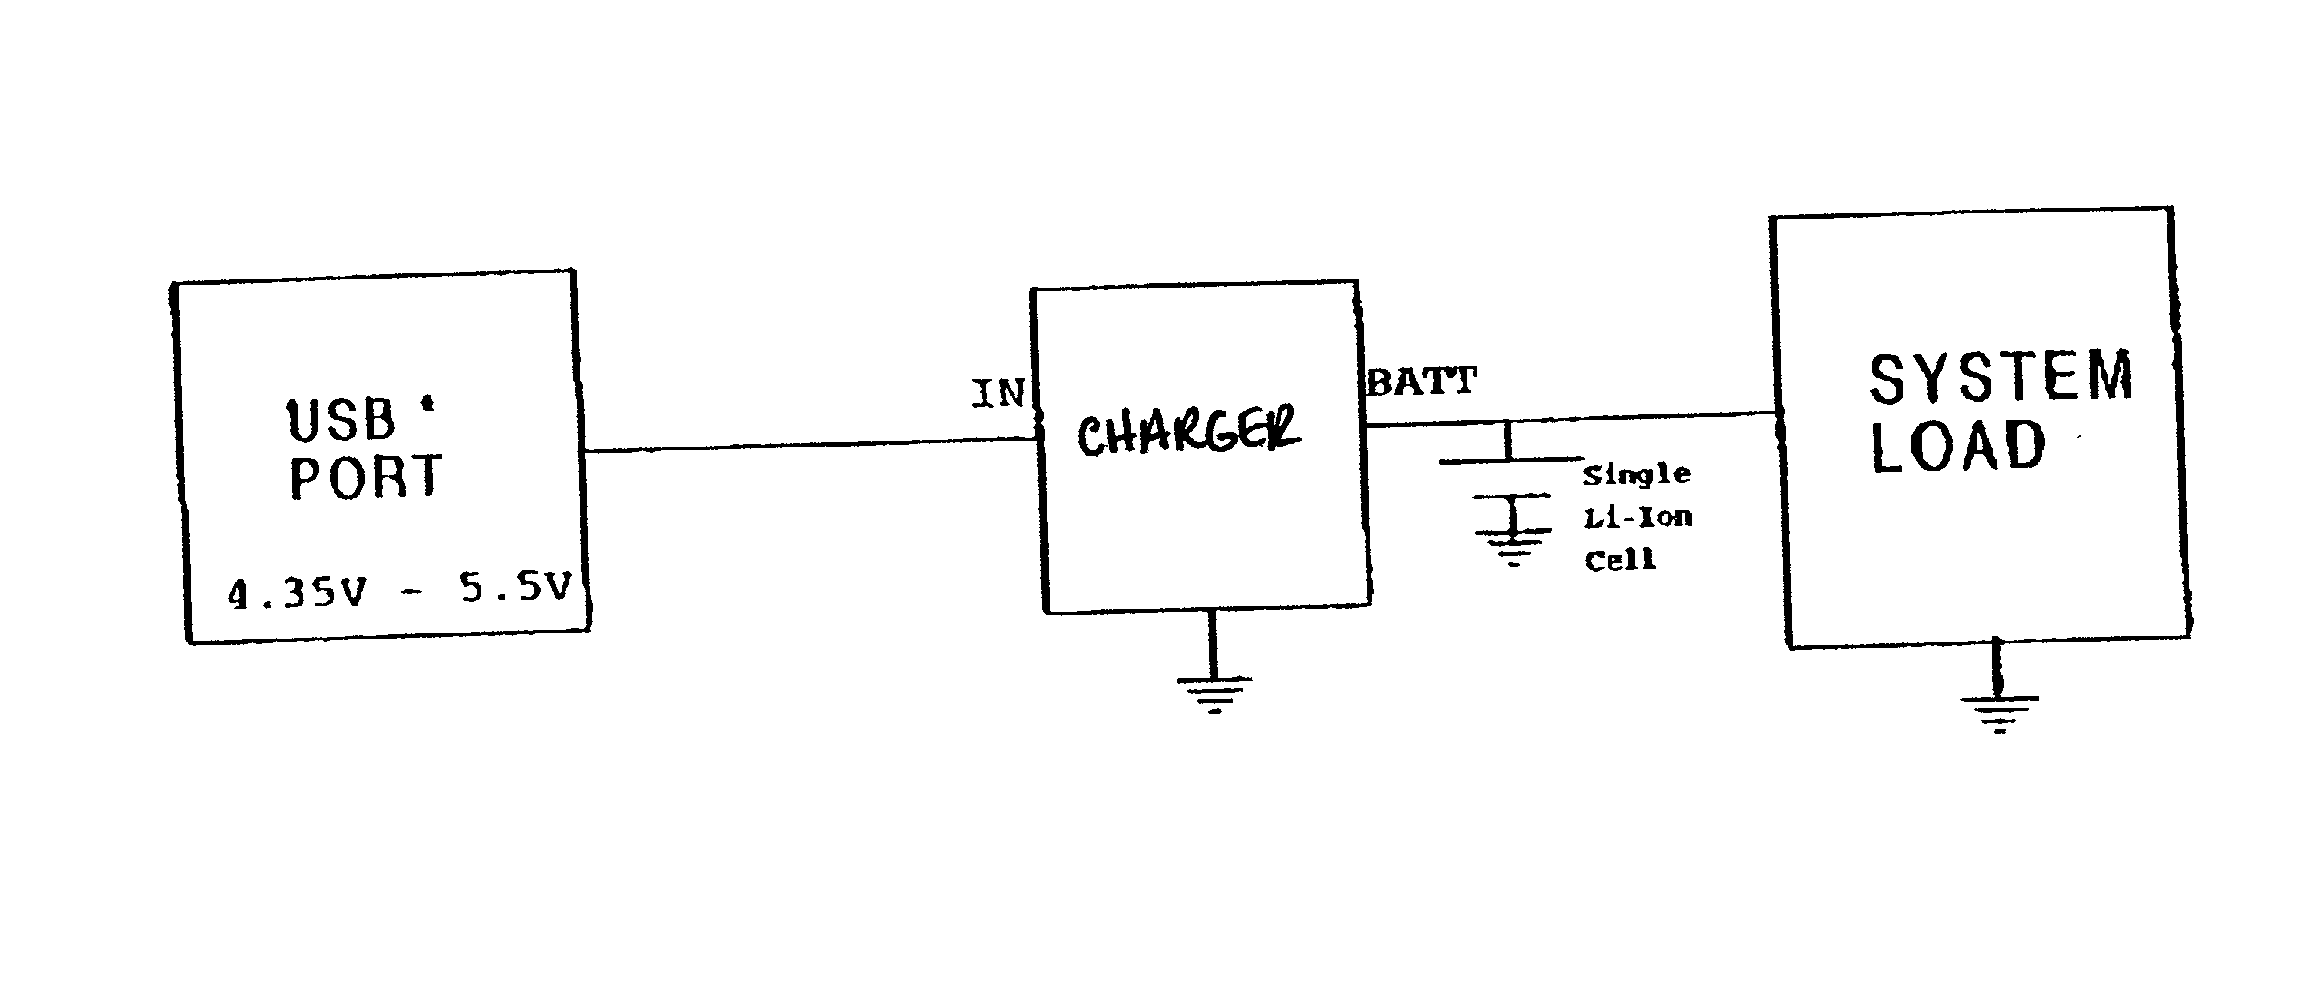 Universal serial bus powered battery charger